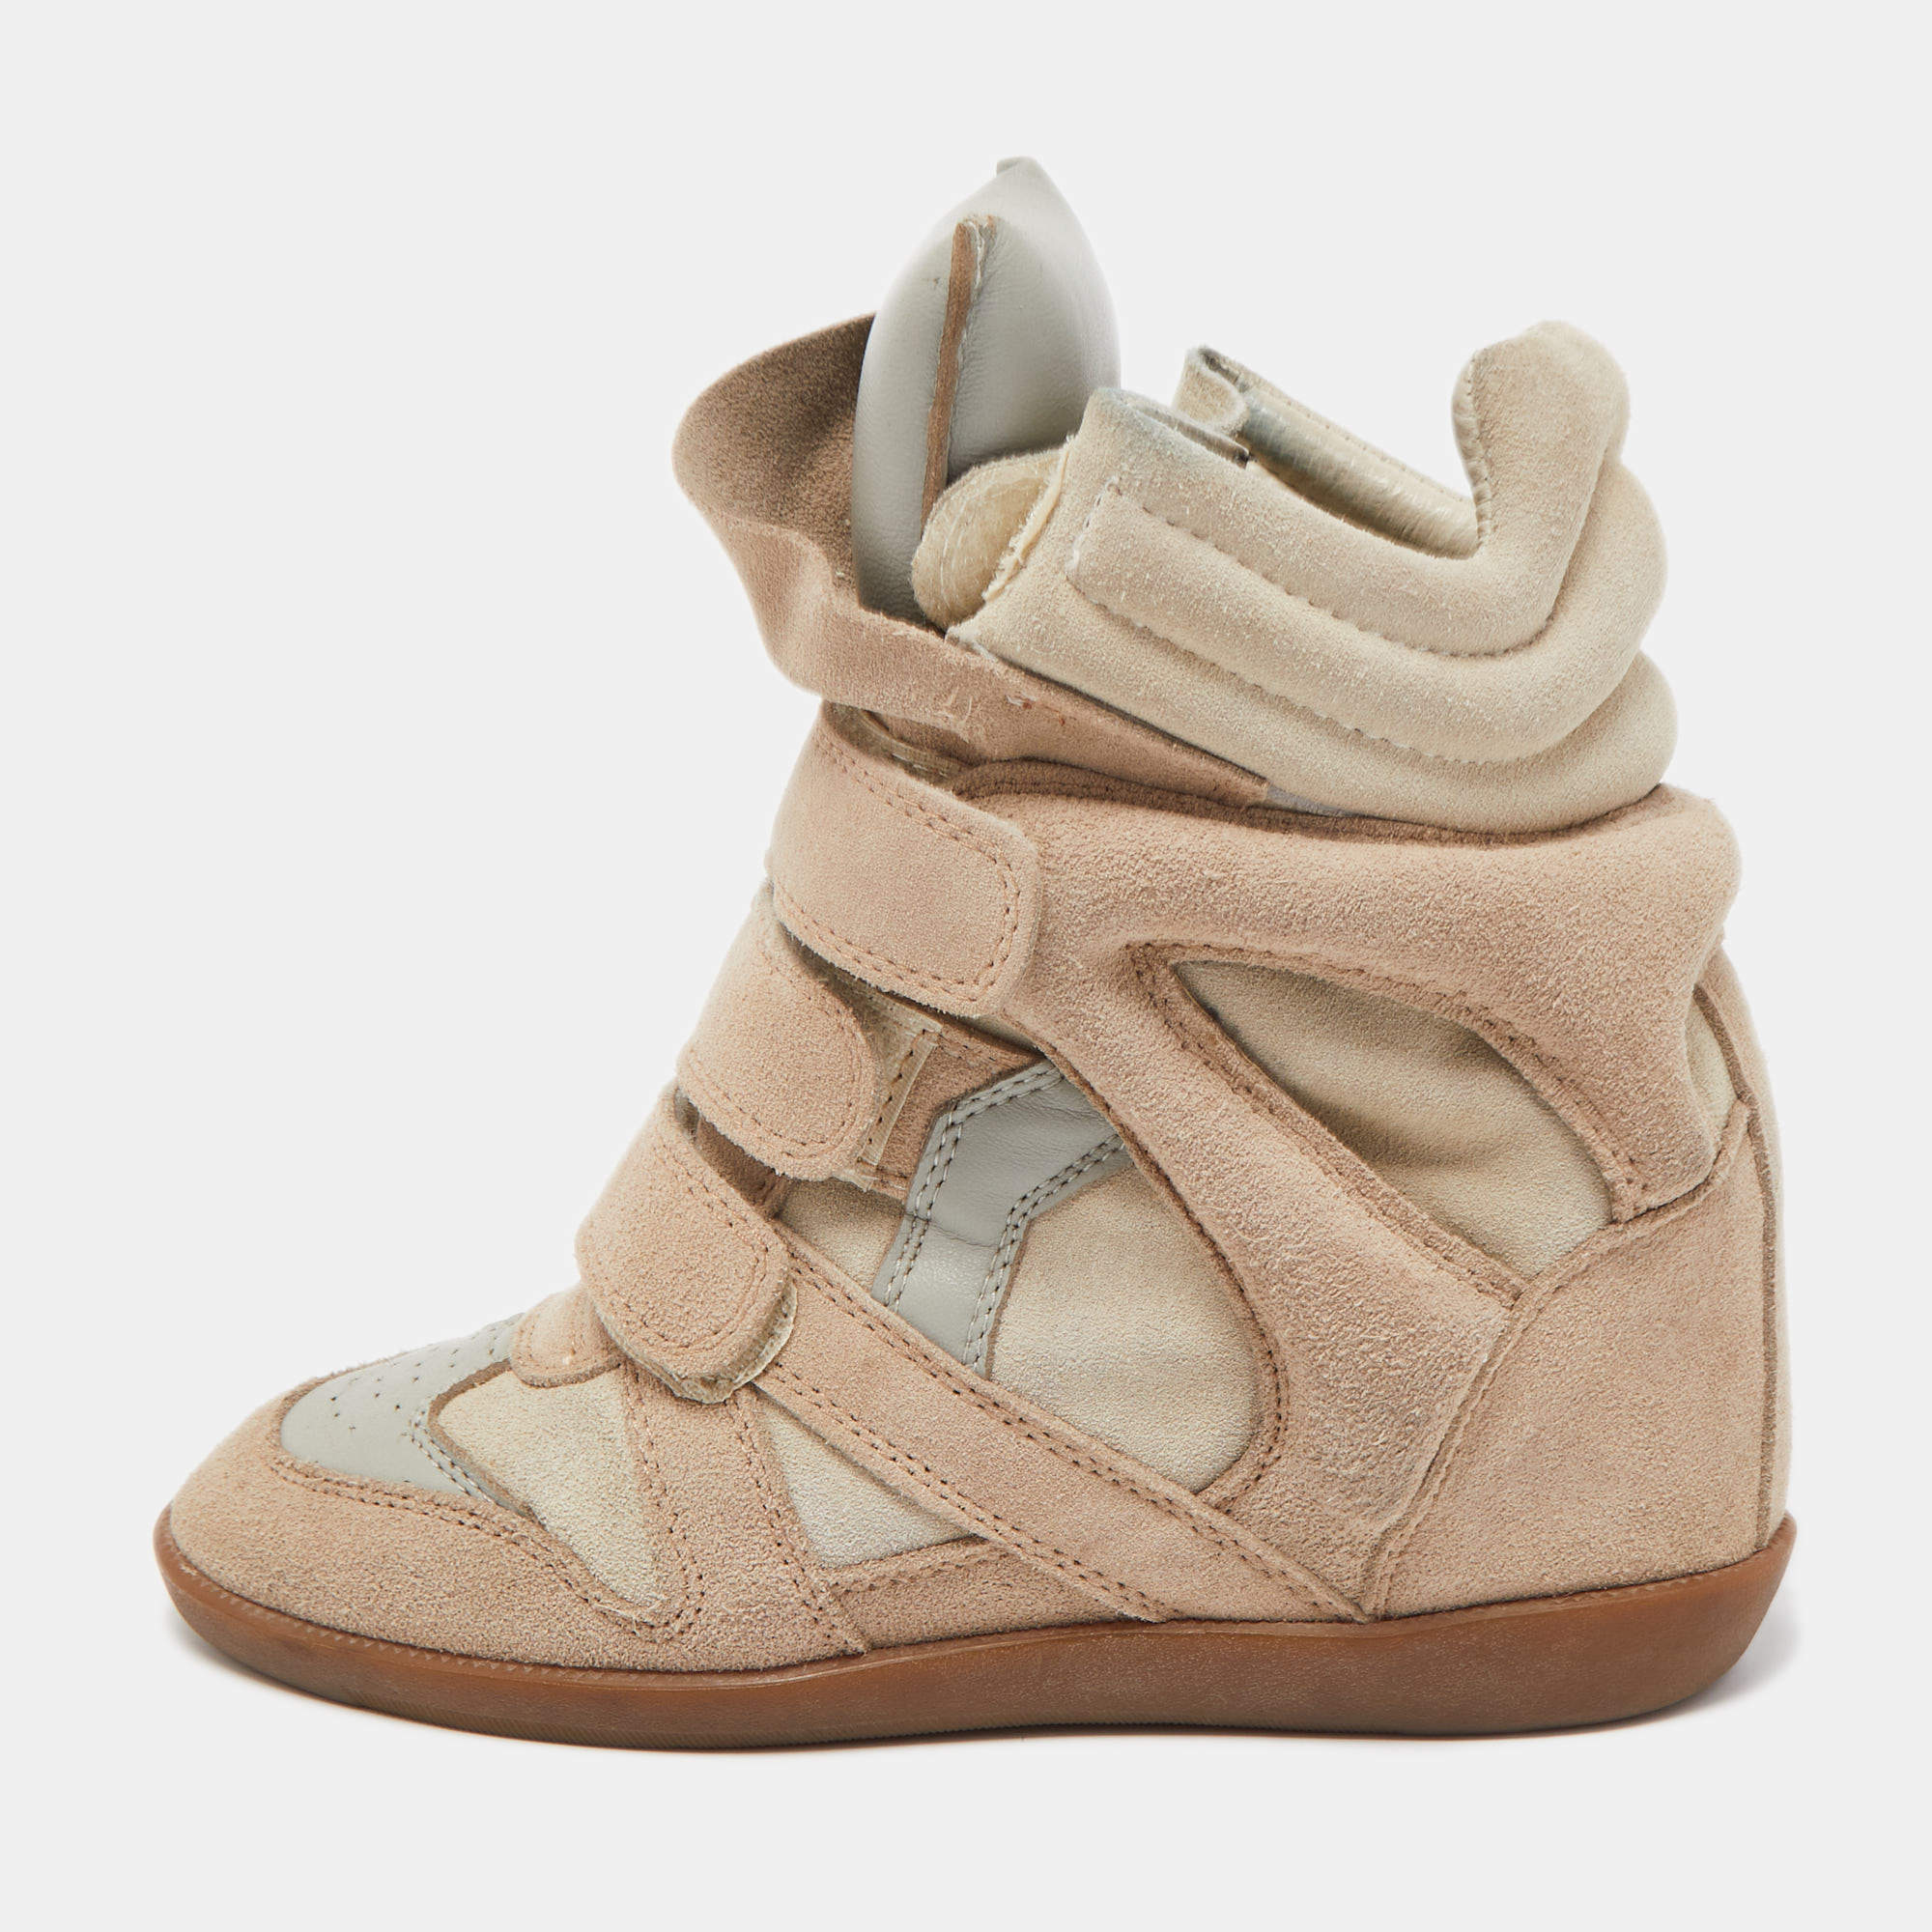 Isabel Marant Tricolor Suede and Leather Bekett Wedge Sneakers Size 37